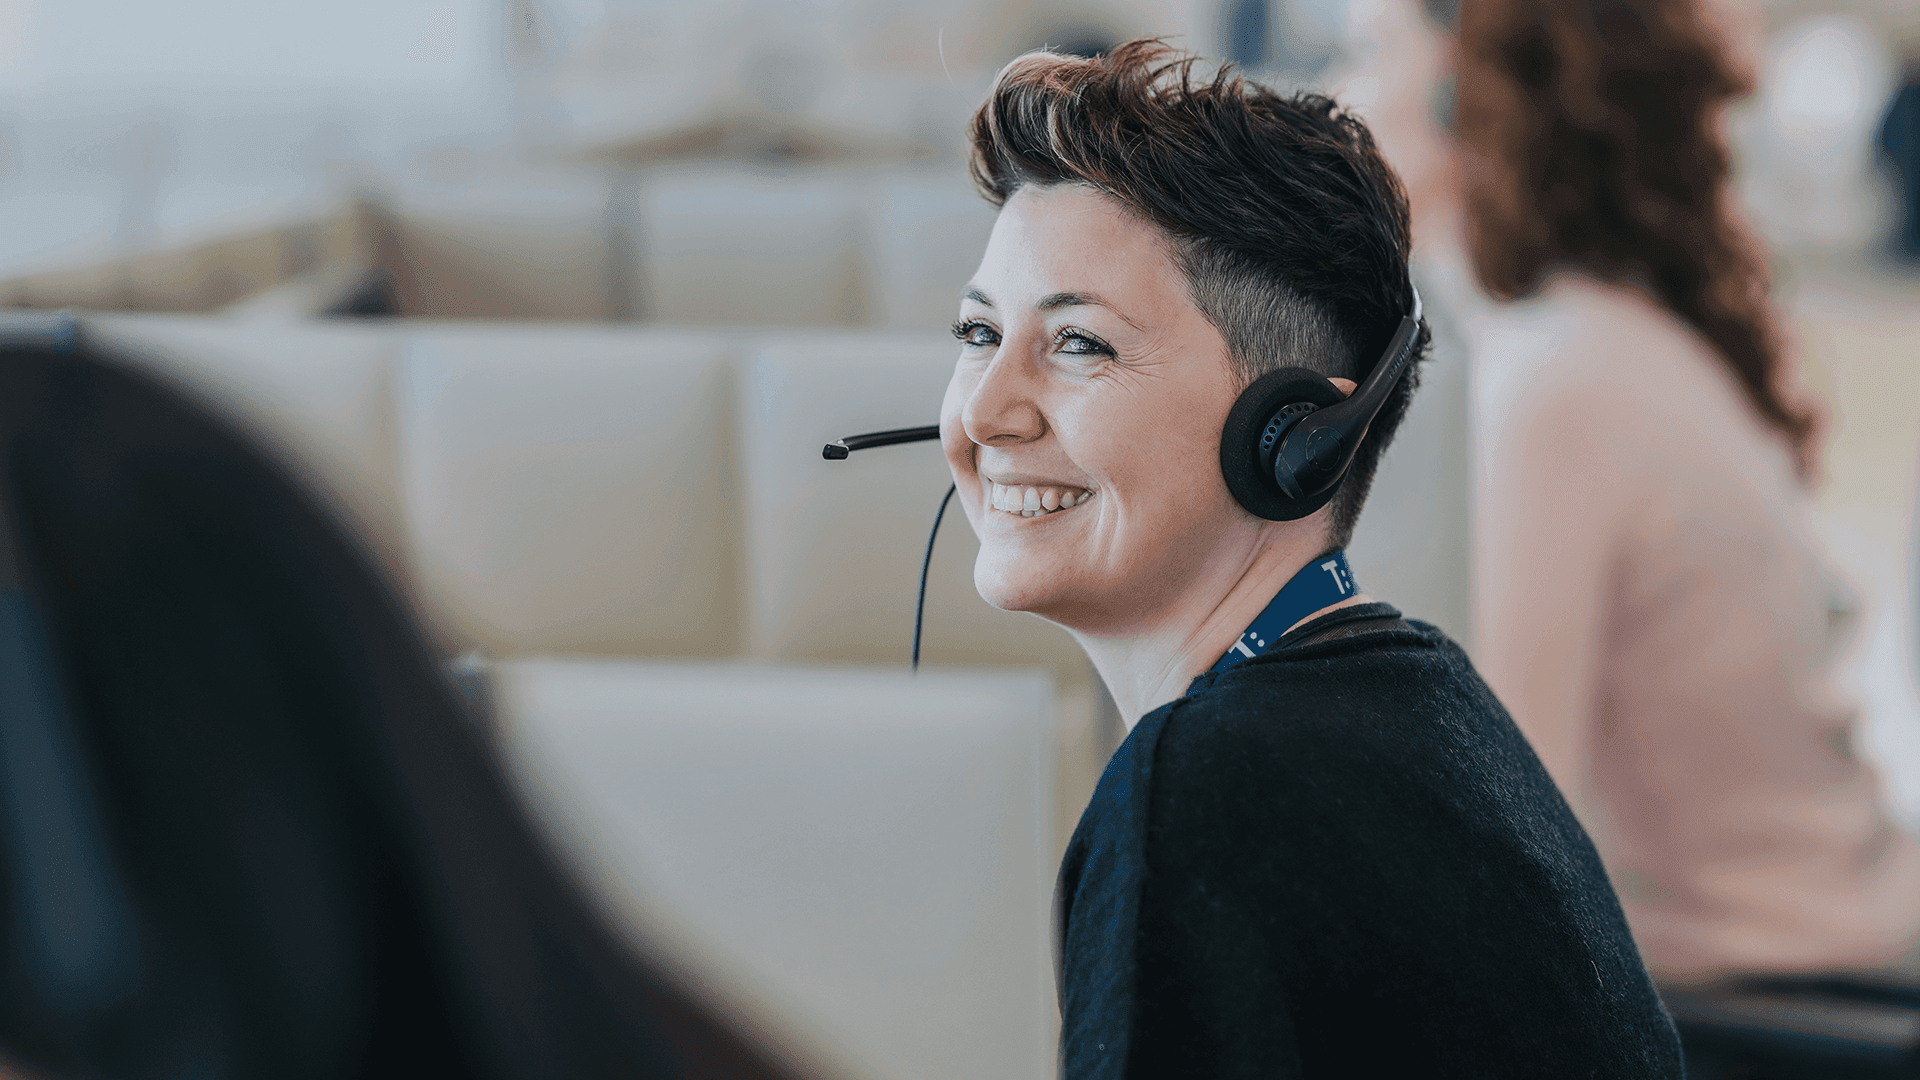 customer service woman with headset